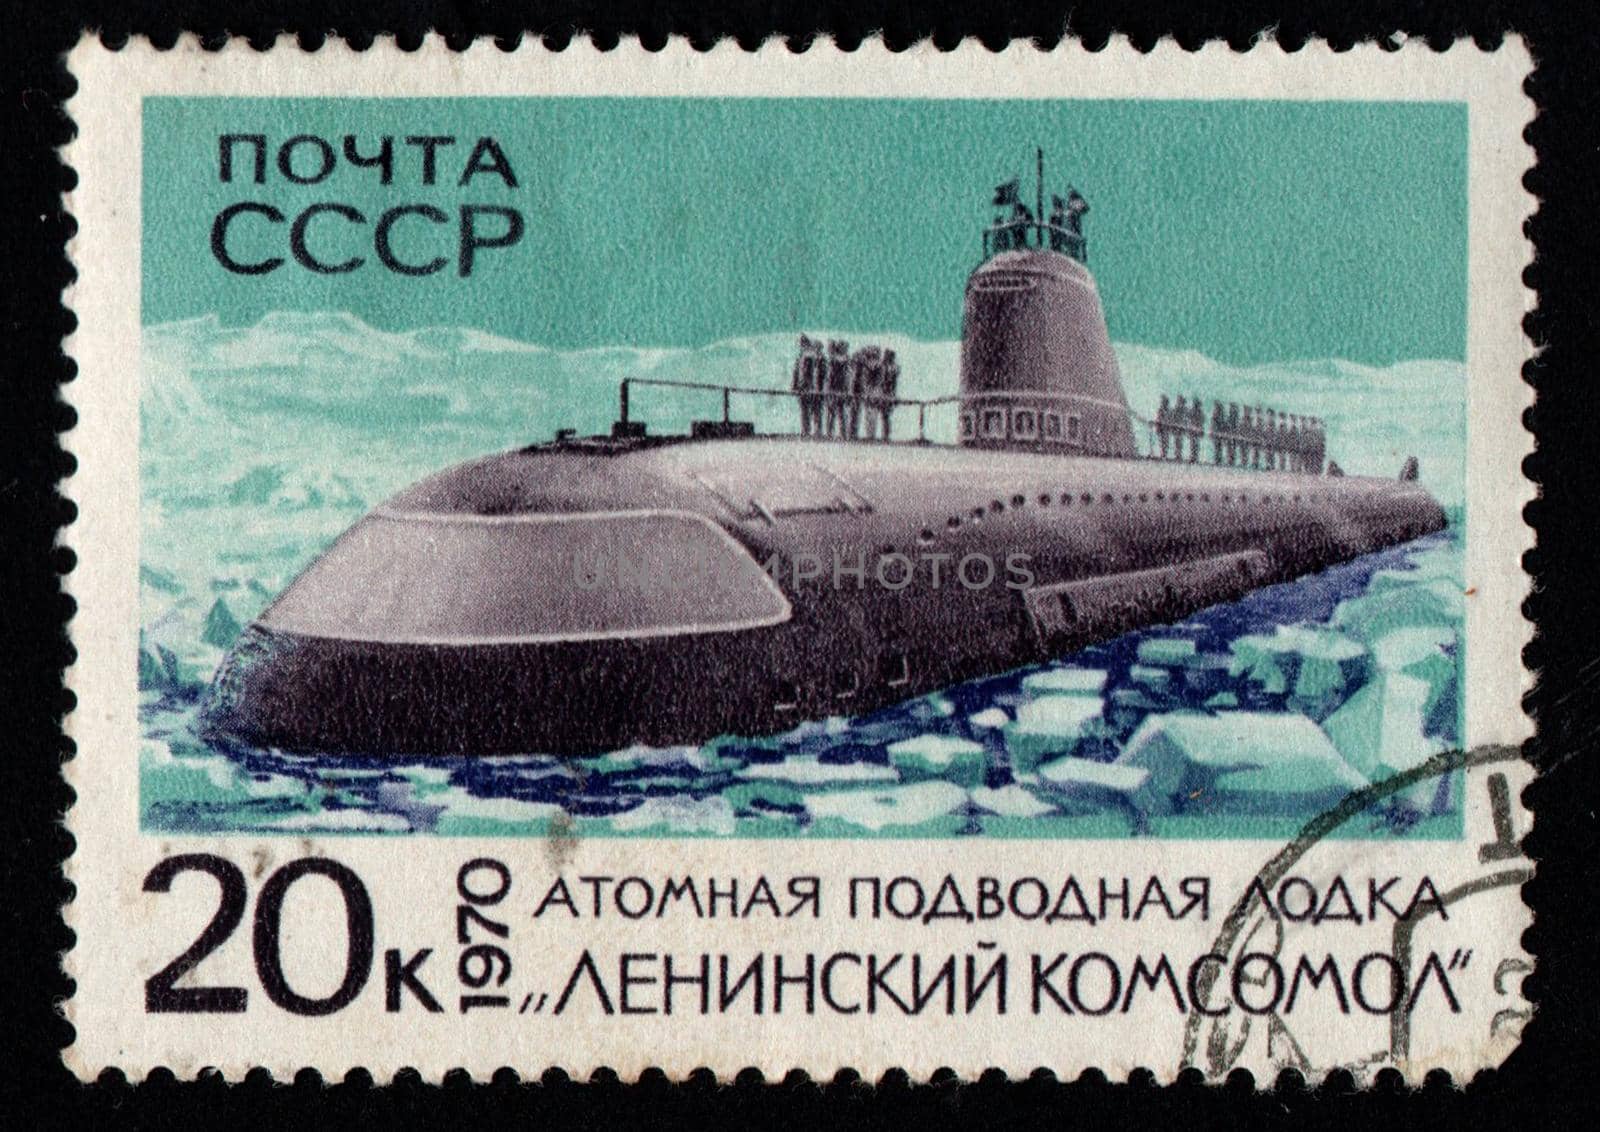 USSR - CIRCA 1970: USSR postage stamp dedicated to Soviet nuclear submarine. Nuclear submarine imaged on postage stamp. Old Soviet postage stamp. Nuclear submarine at sea with ice